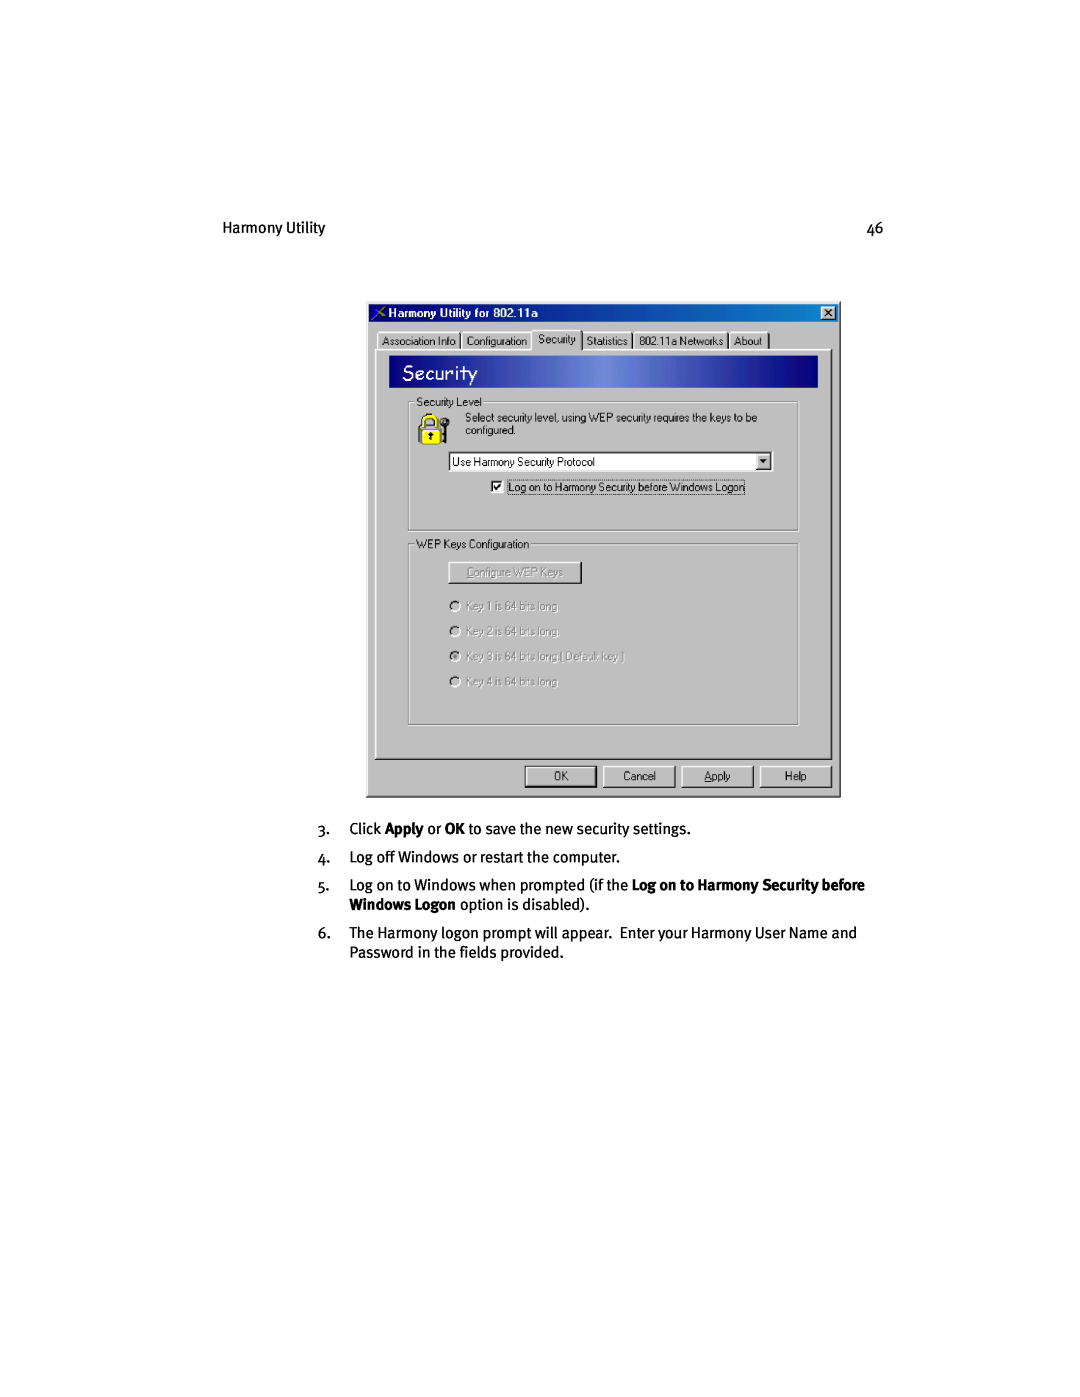 Harmony House 802.11a manual Harmony Utility, Click Apply or OK to save the new security settings 